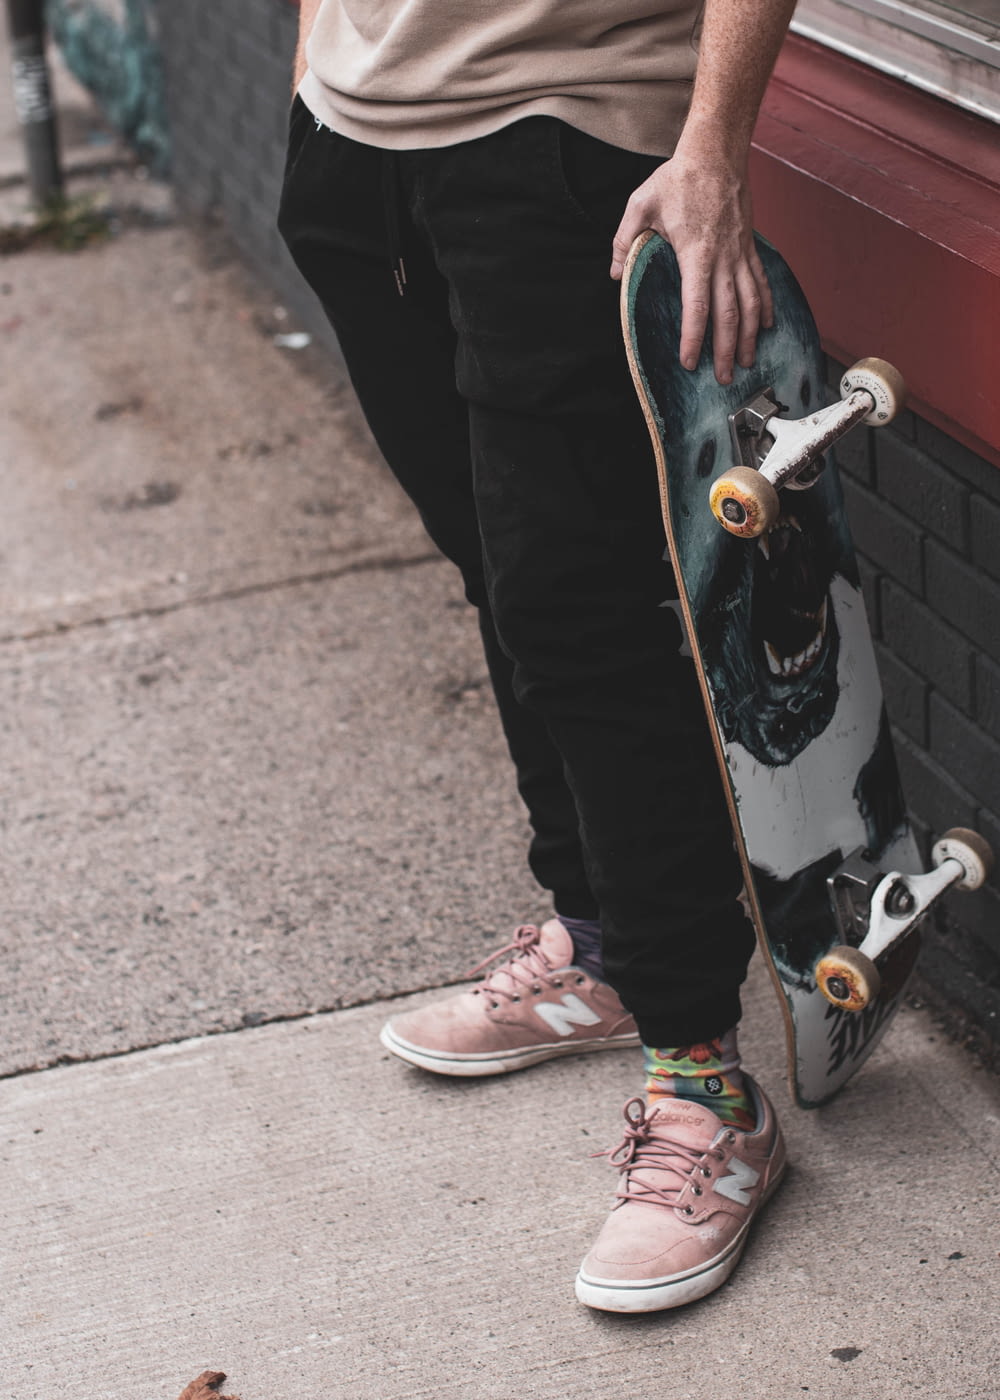 person in black pants and pink and white nike sneakers holding skateboard